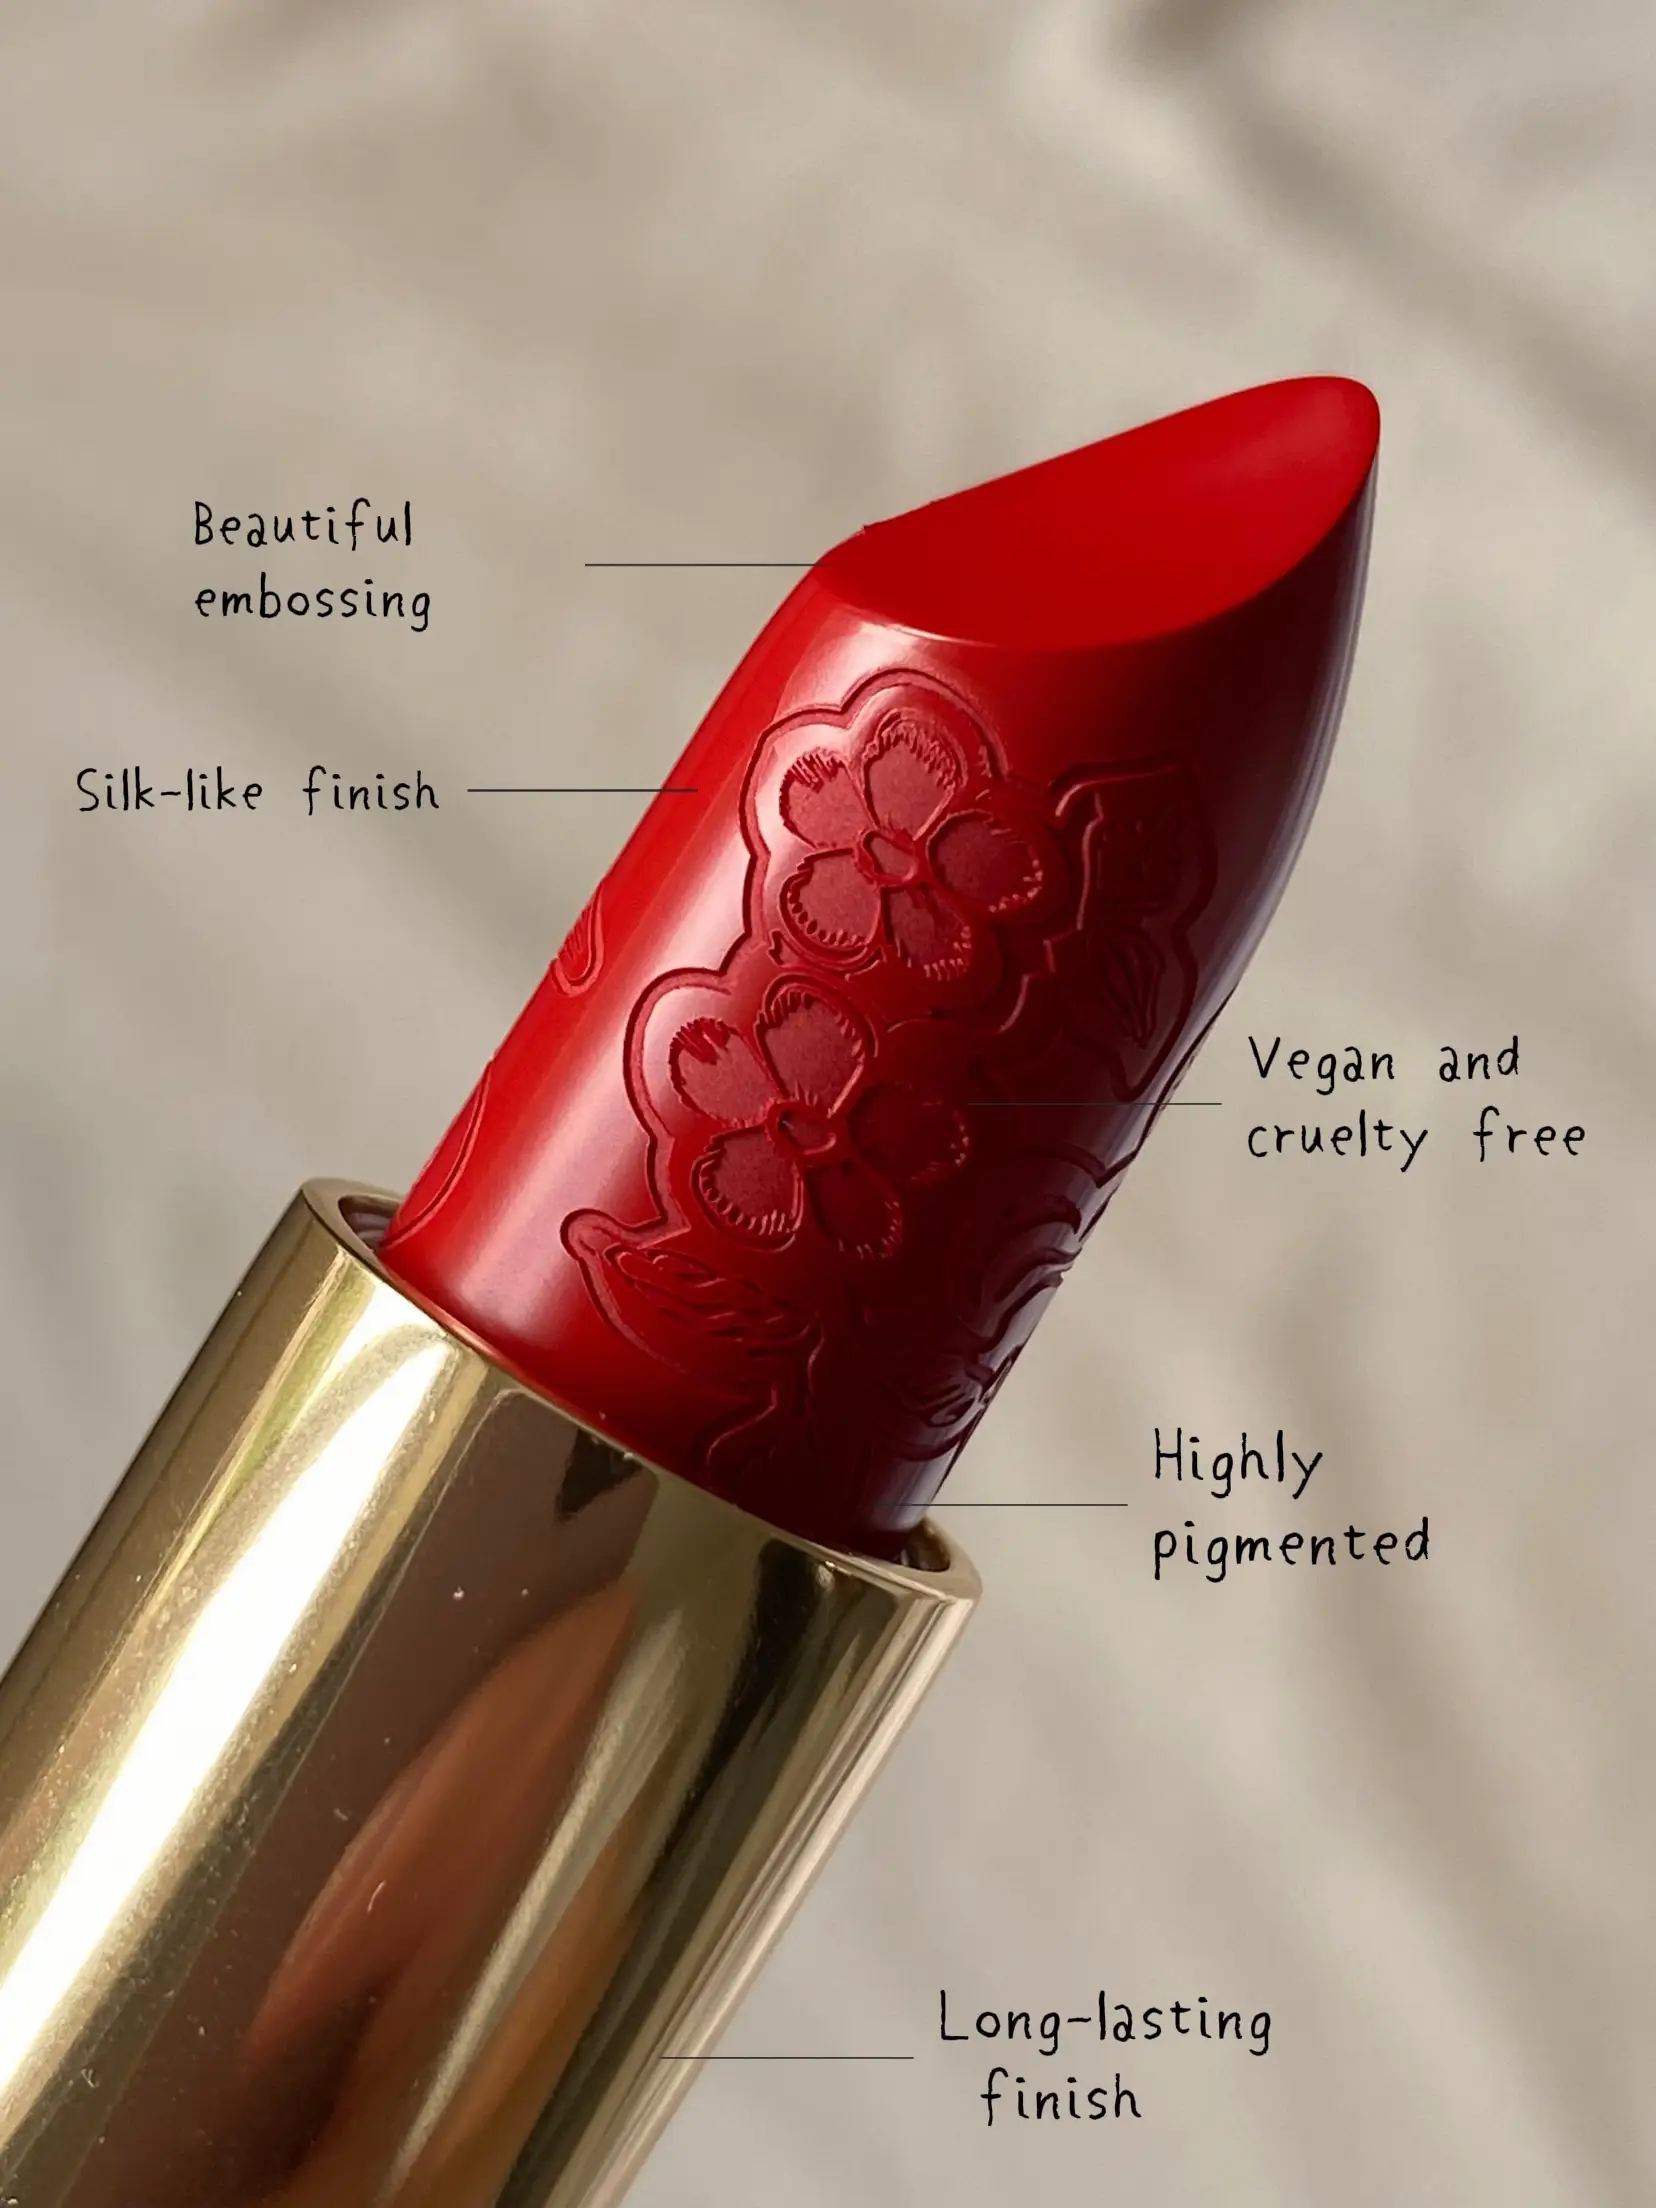 The Red Lip: An American Classic